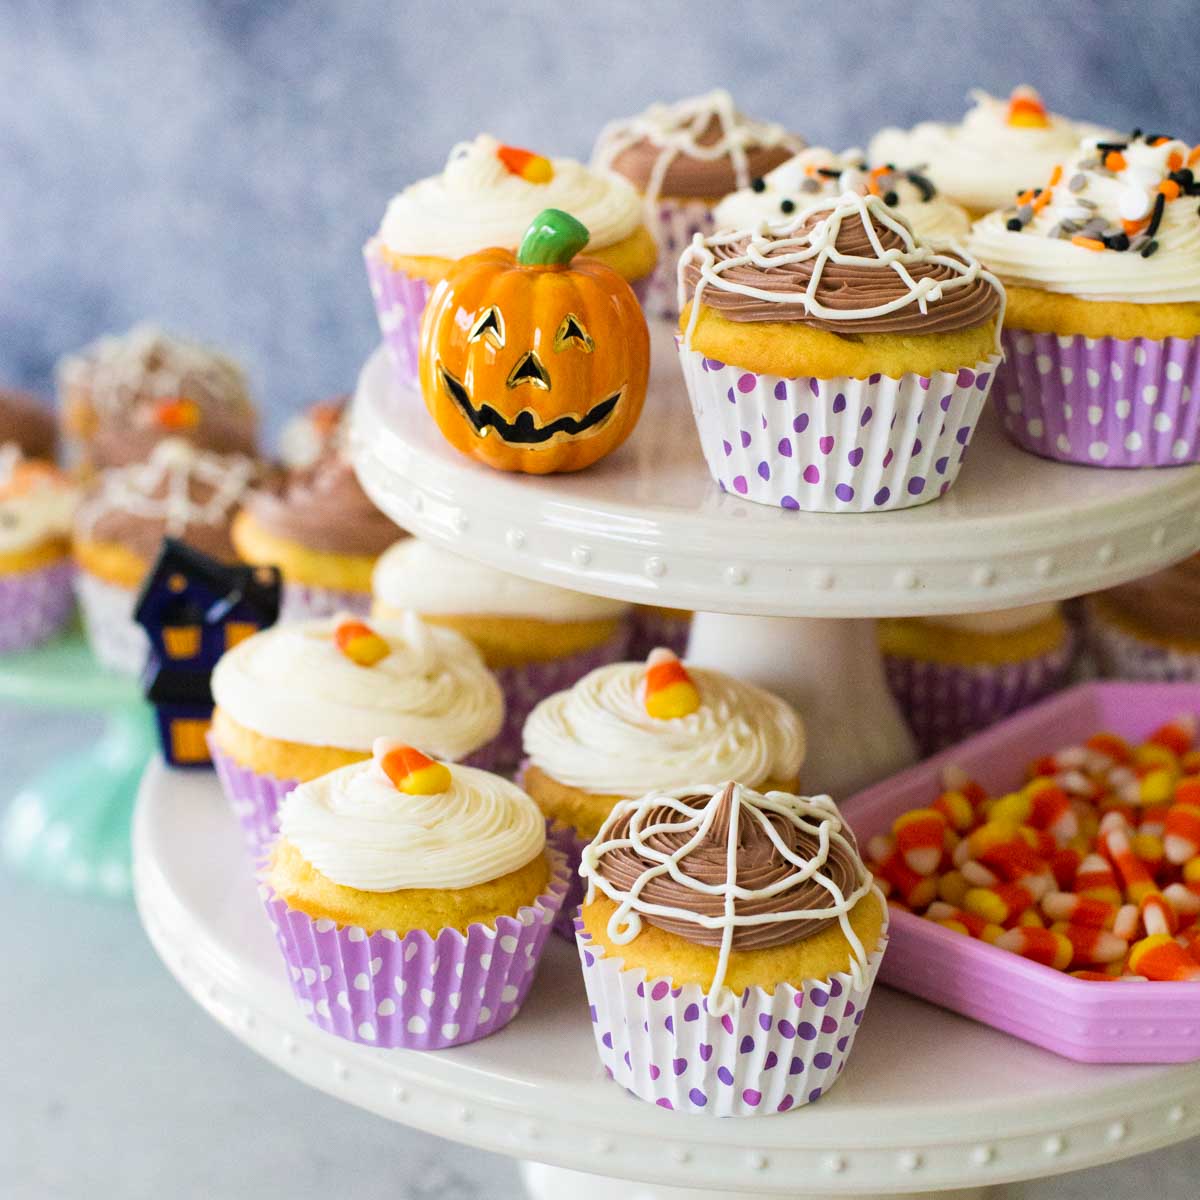 A two-tier cake plate has cute Halloween cupcakes in lavender polka dot wrappers. There is a dish of candy corn on the side.